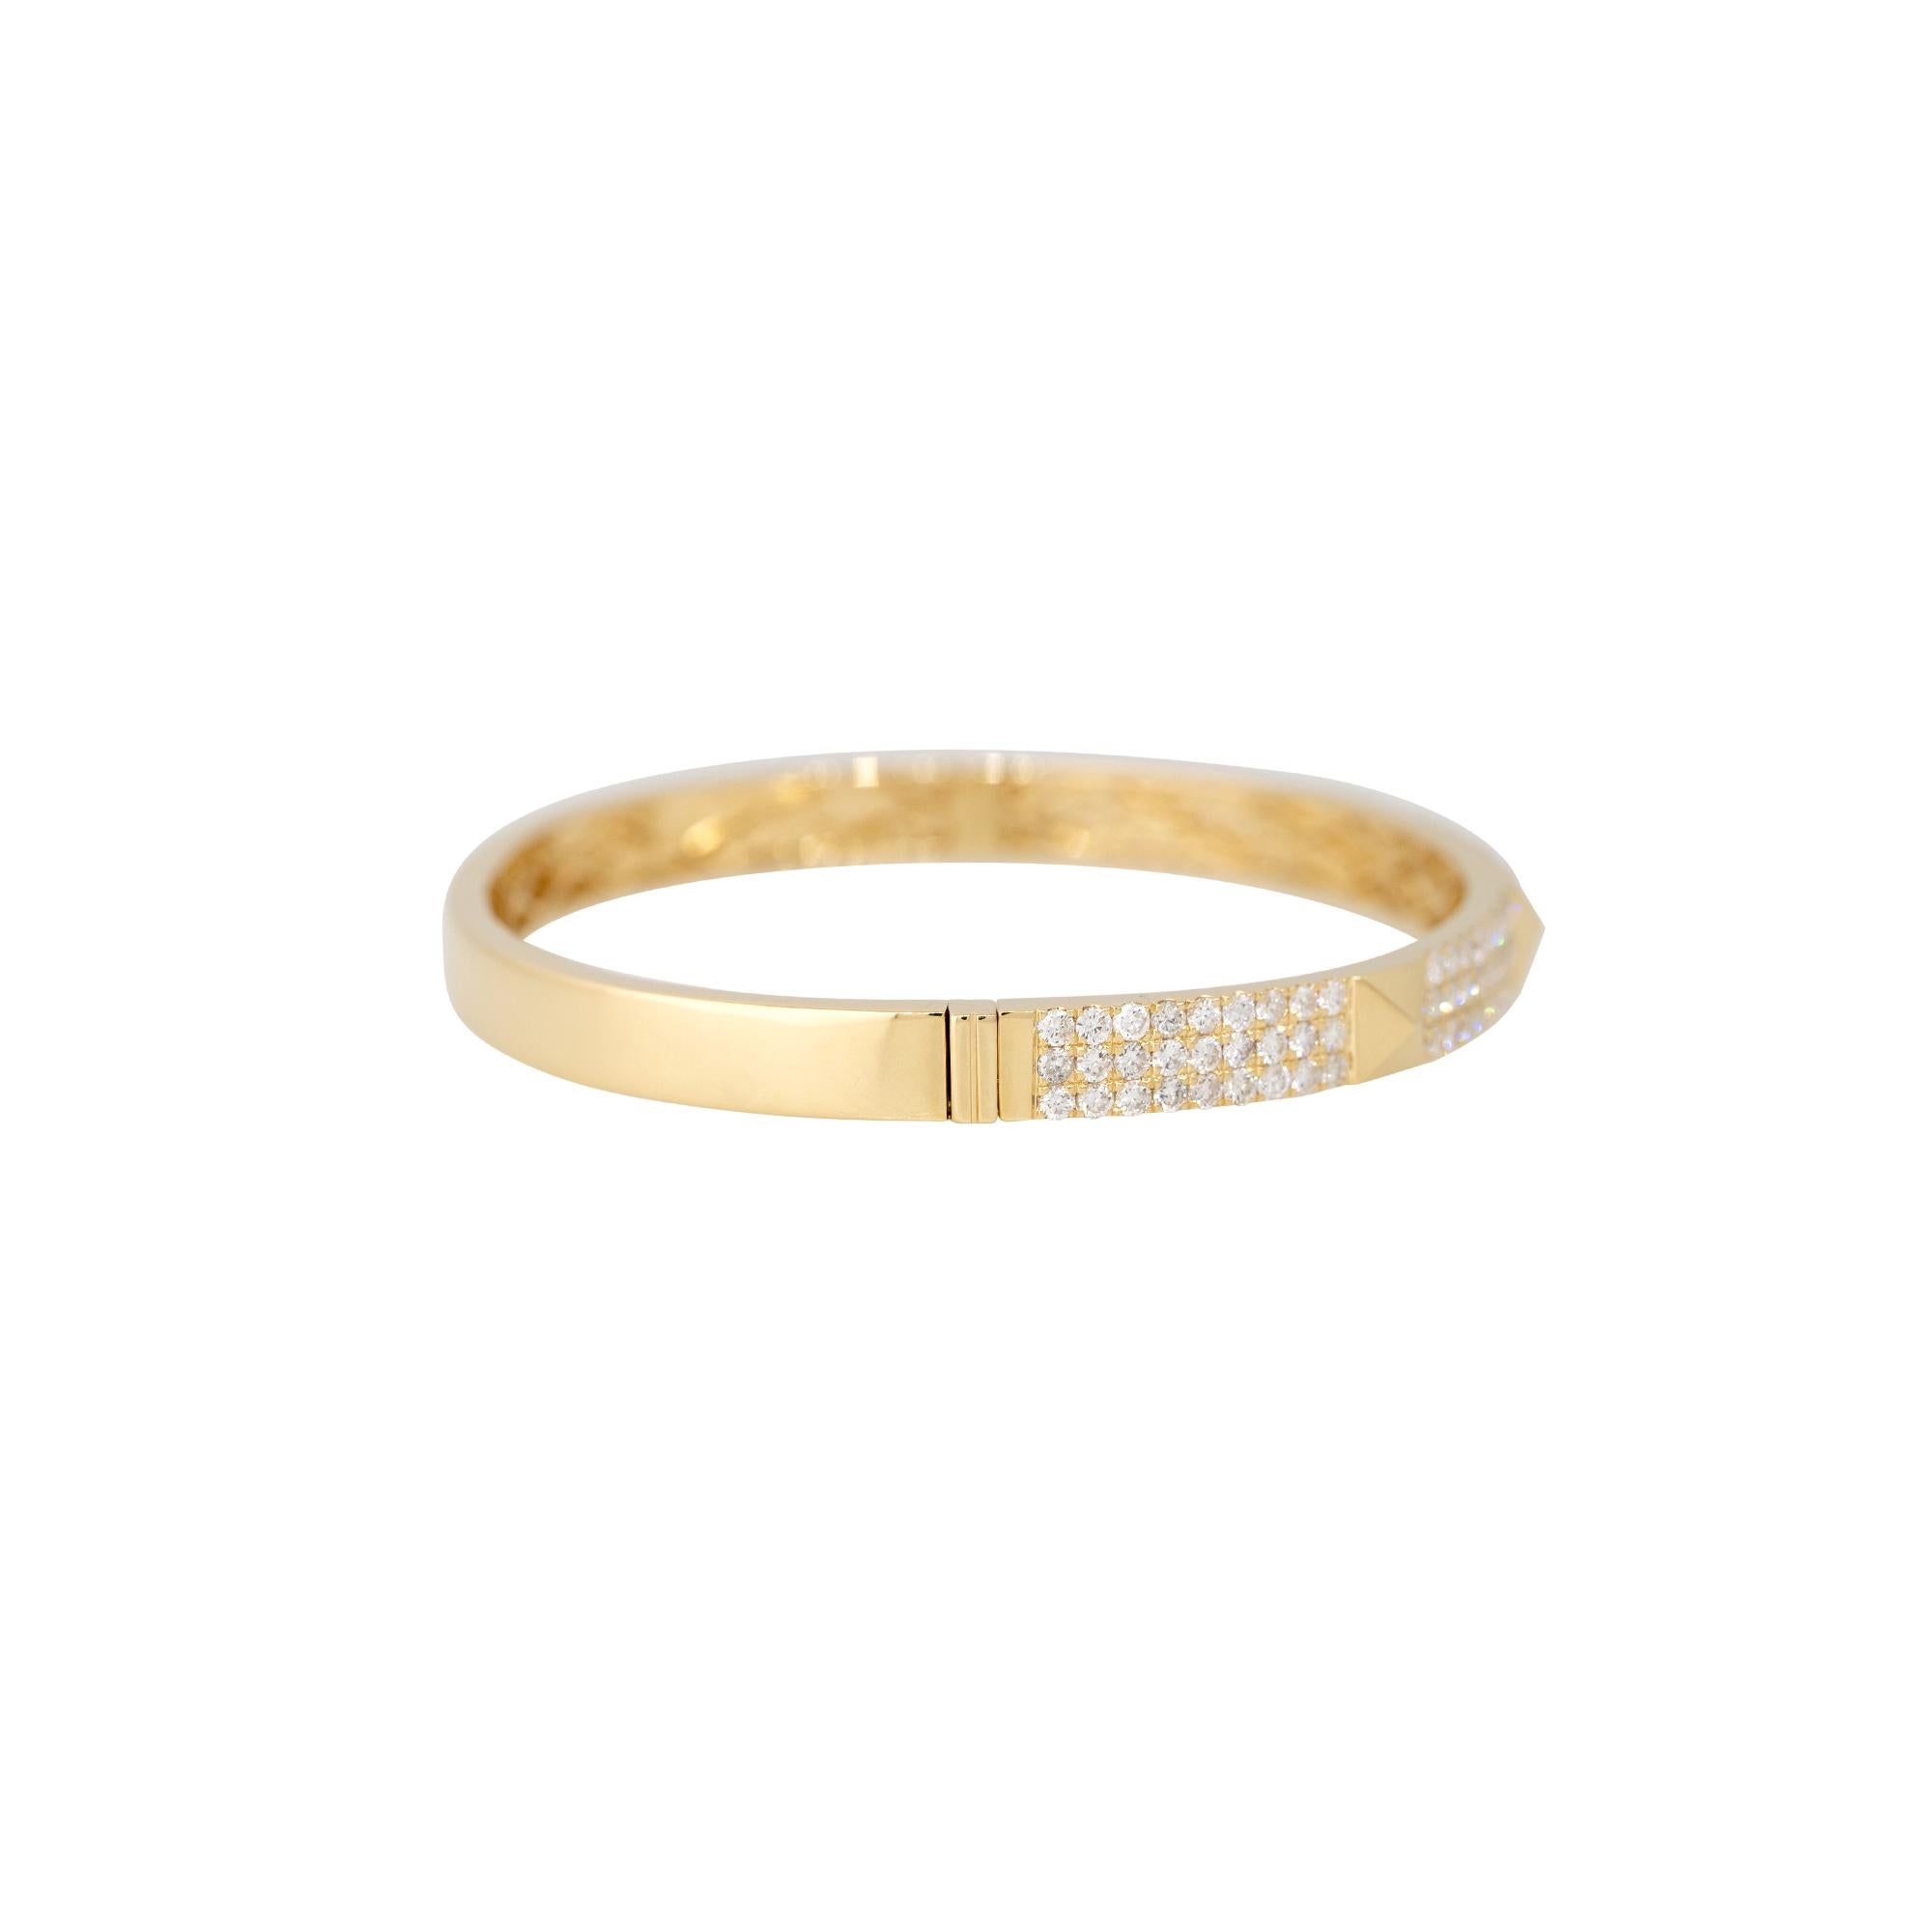 18k Yellow Gold 2.40ctw Pave Diamond Rock Stud Bangle Bracelet
Material: 18k Yellow Gold
Diamond Details: There are approximately 2.40 carats of round brilliant-cut diamonds halfway around the bangle
Diamond Clarity: All diamonds are approximately